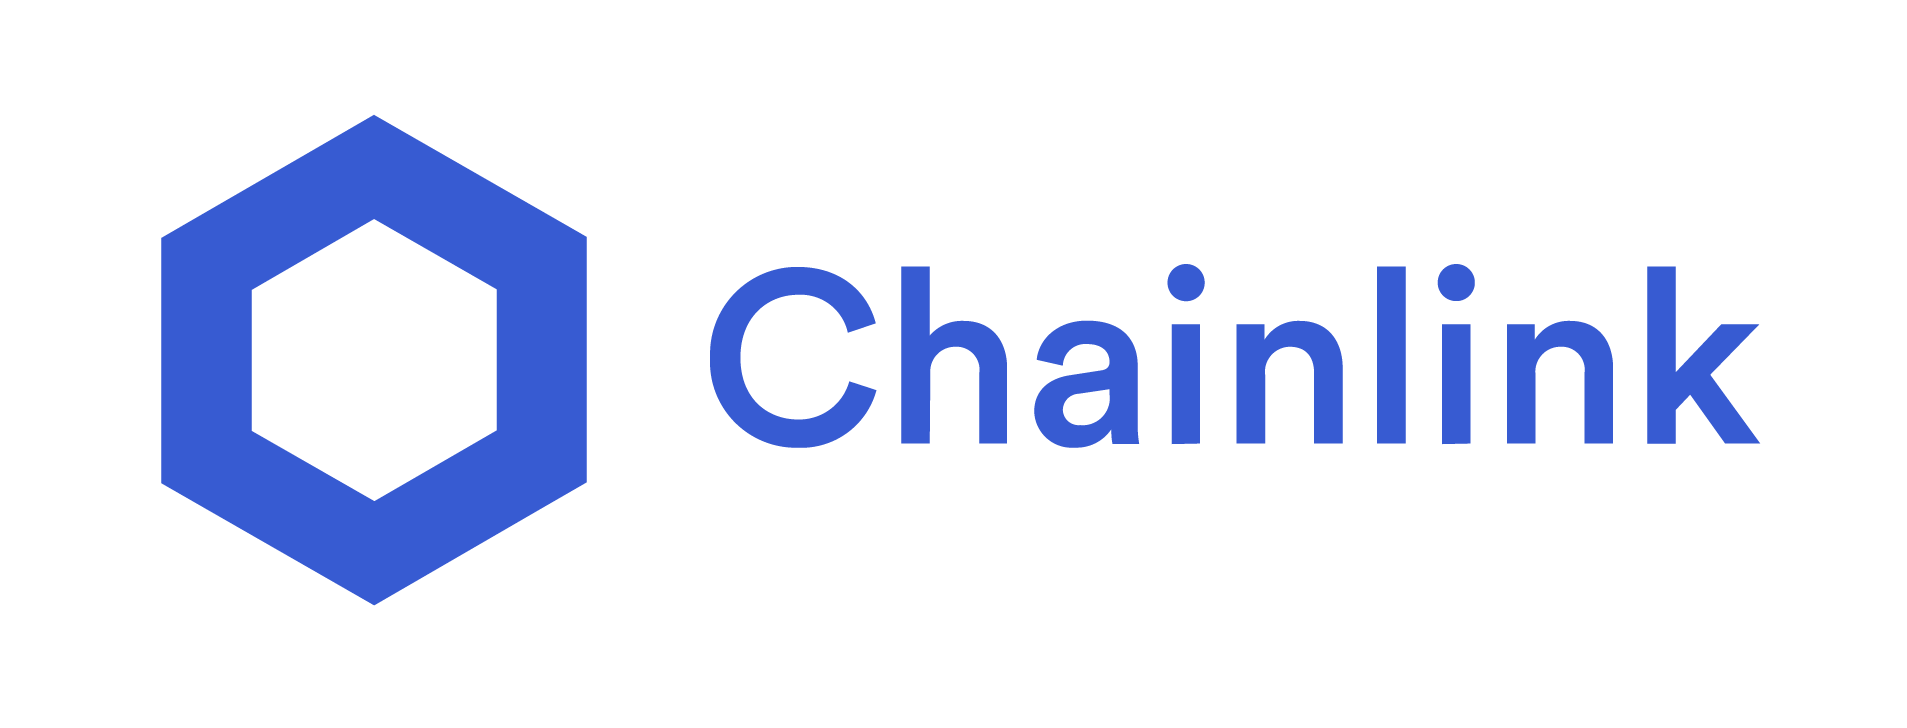 Chainlink response - Global Education Coalition